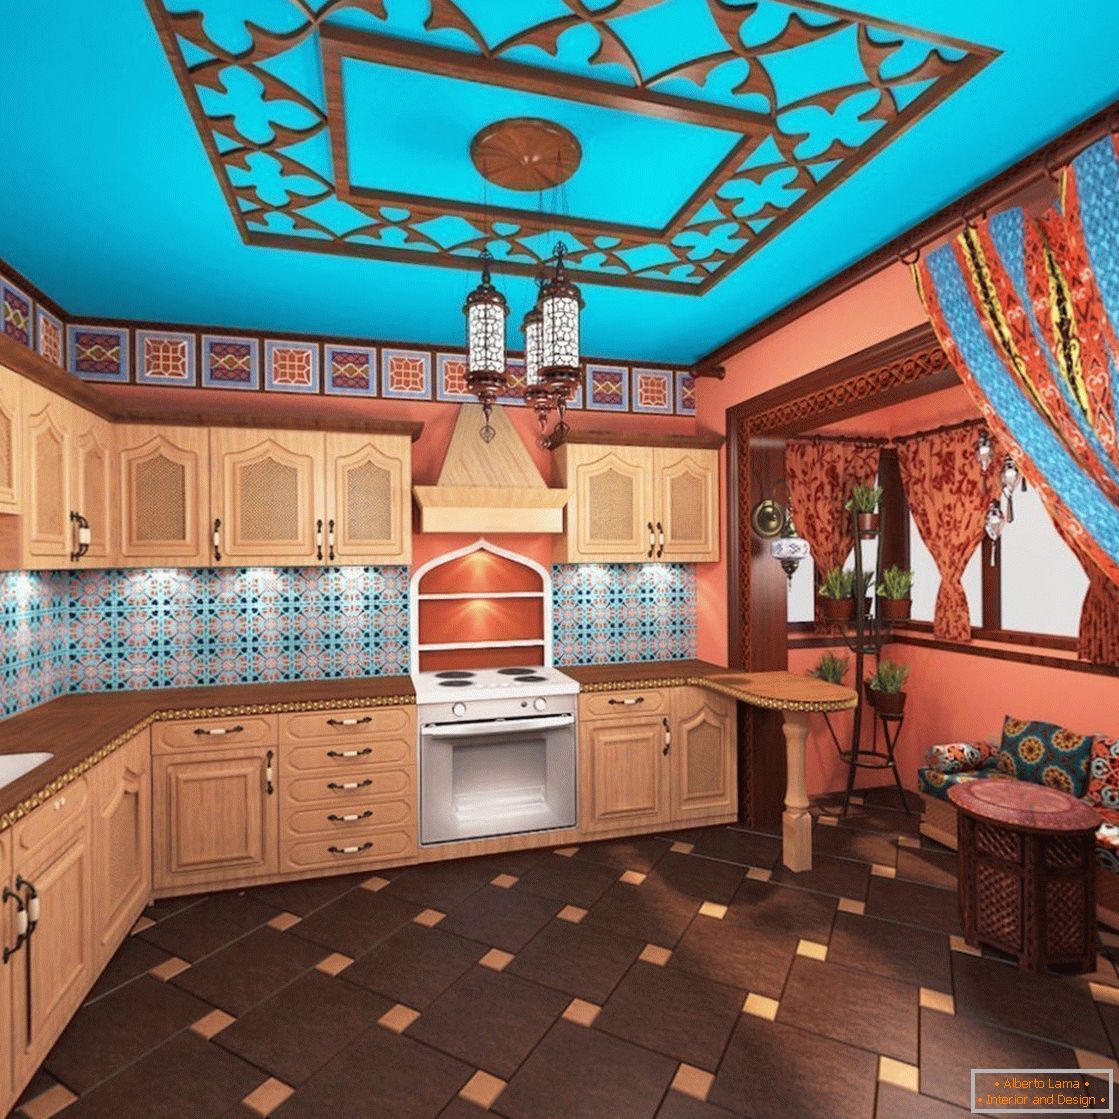 Kitchen with a bright Moroccan style